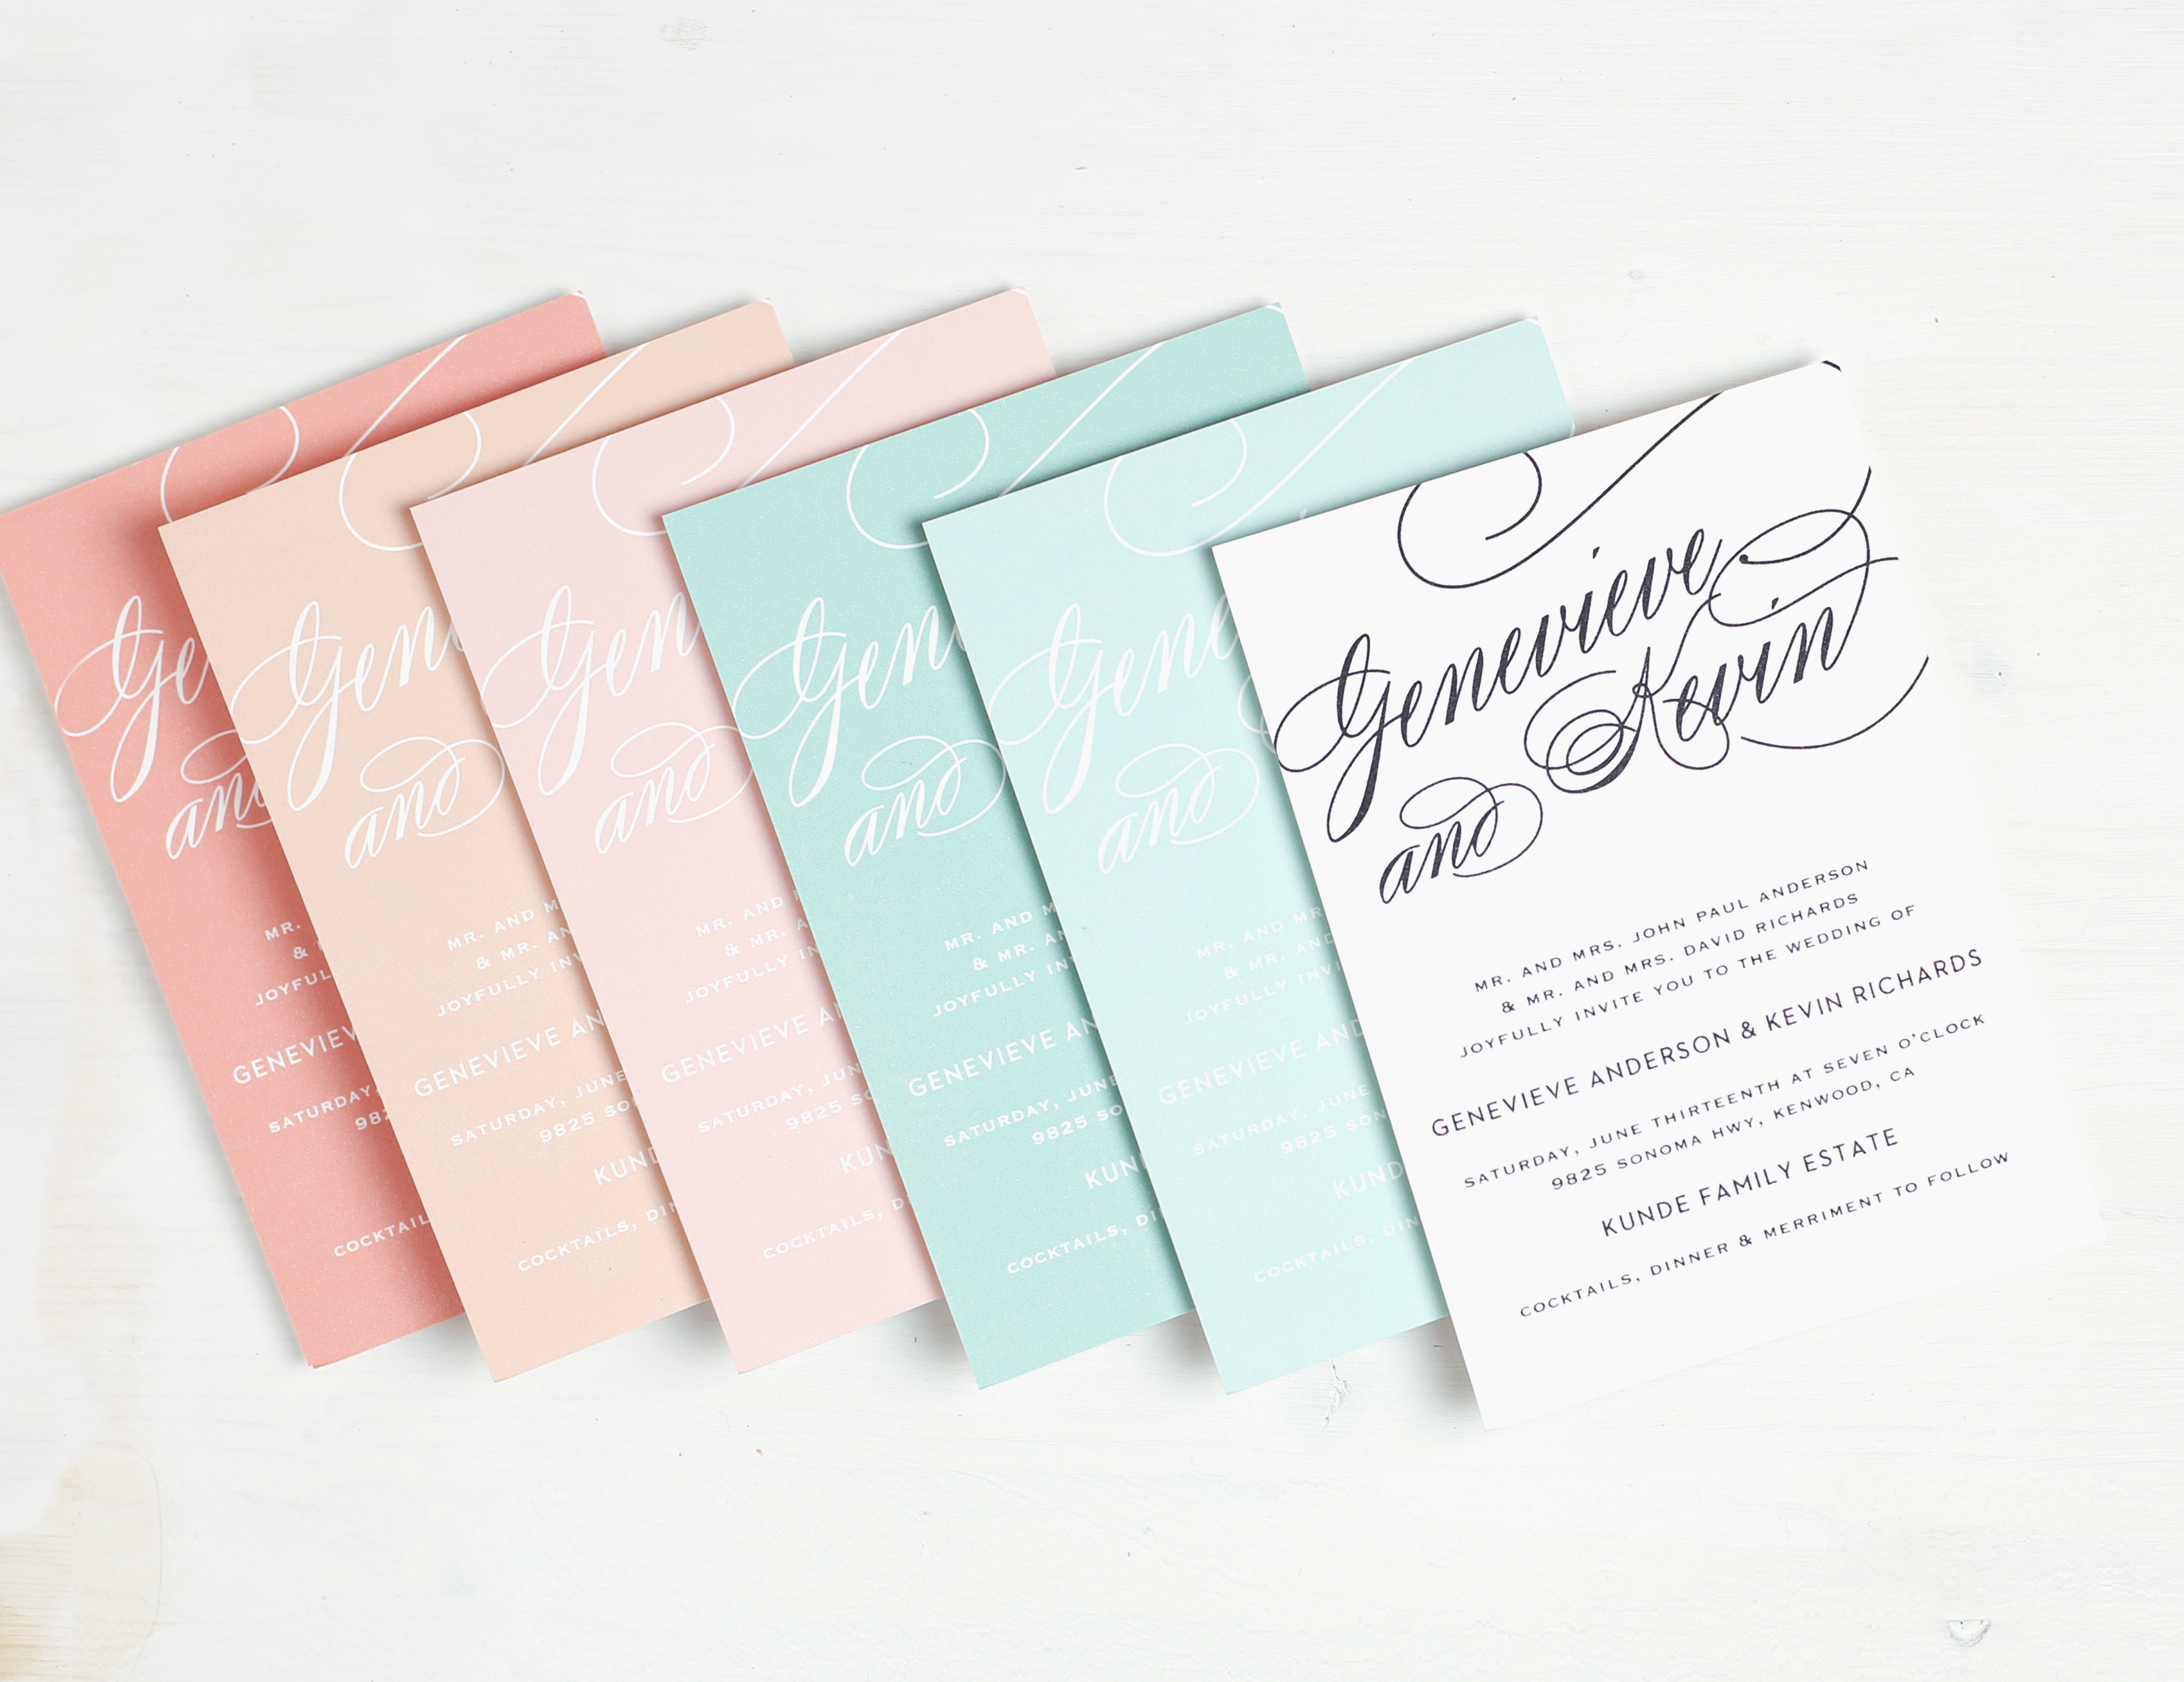 pink, blue, green and white wedding invitations lay atop one another